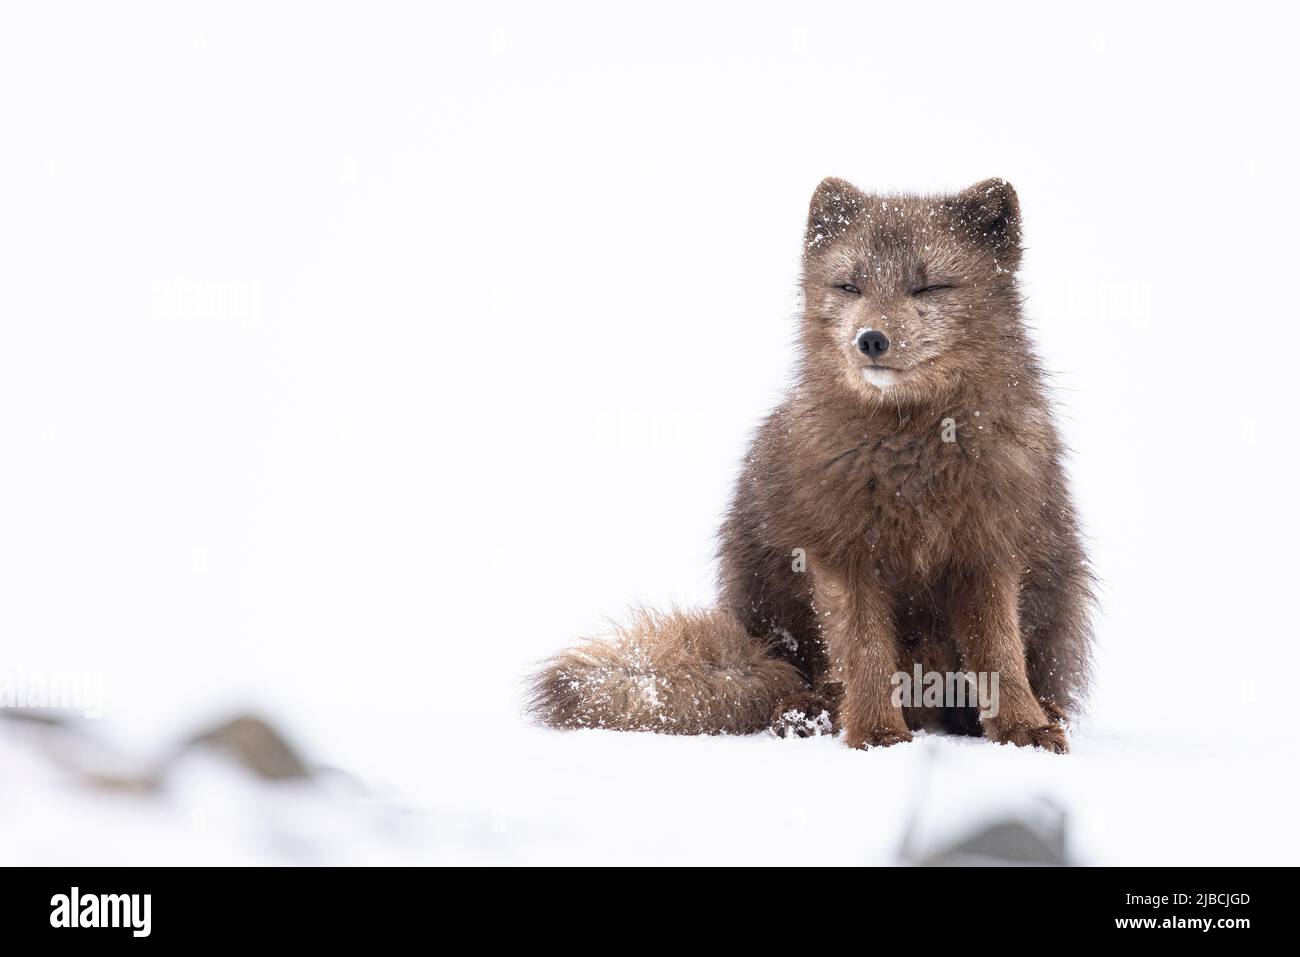 Arctic tundra animals Cut Out Stock Images & Pictures - Alamy